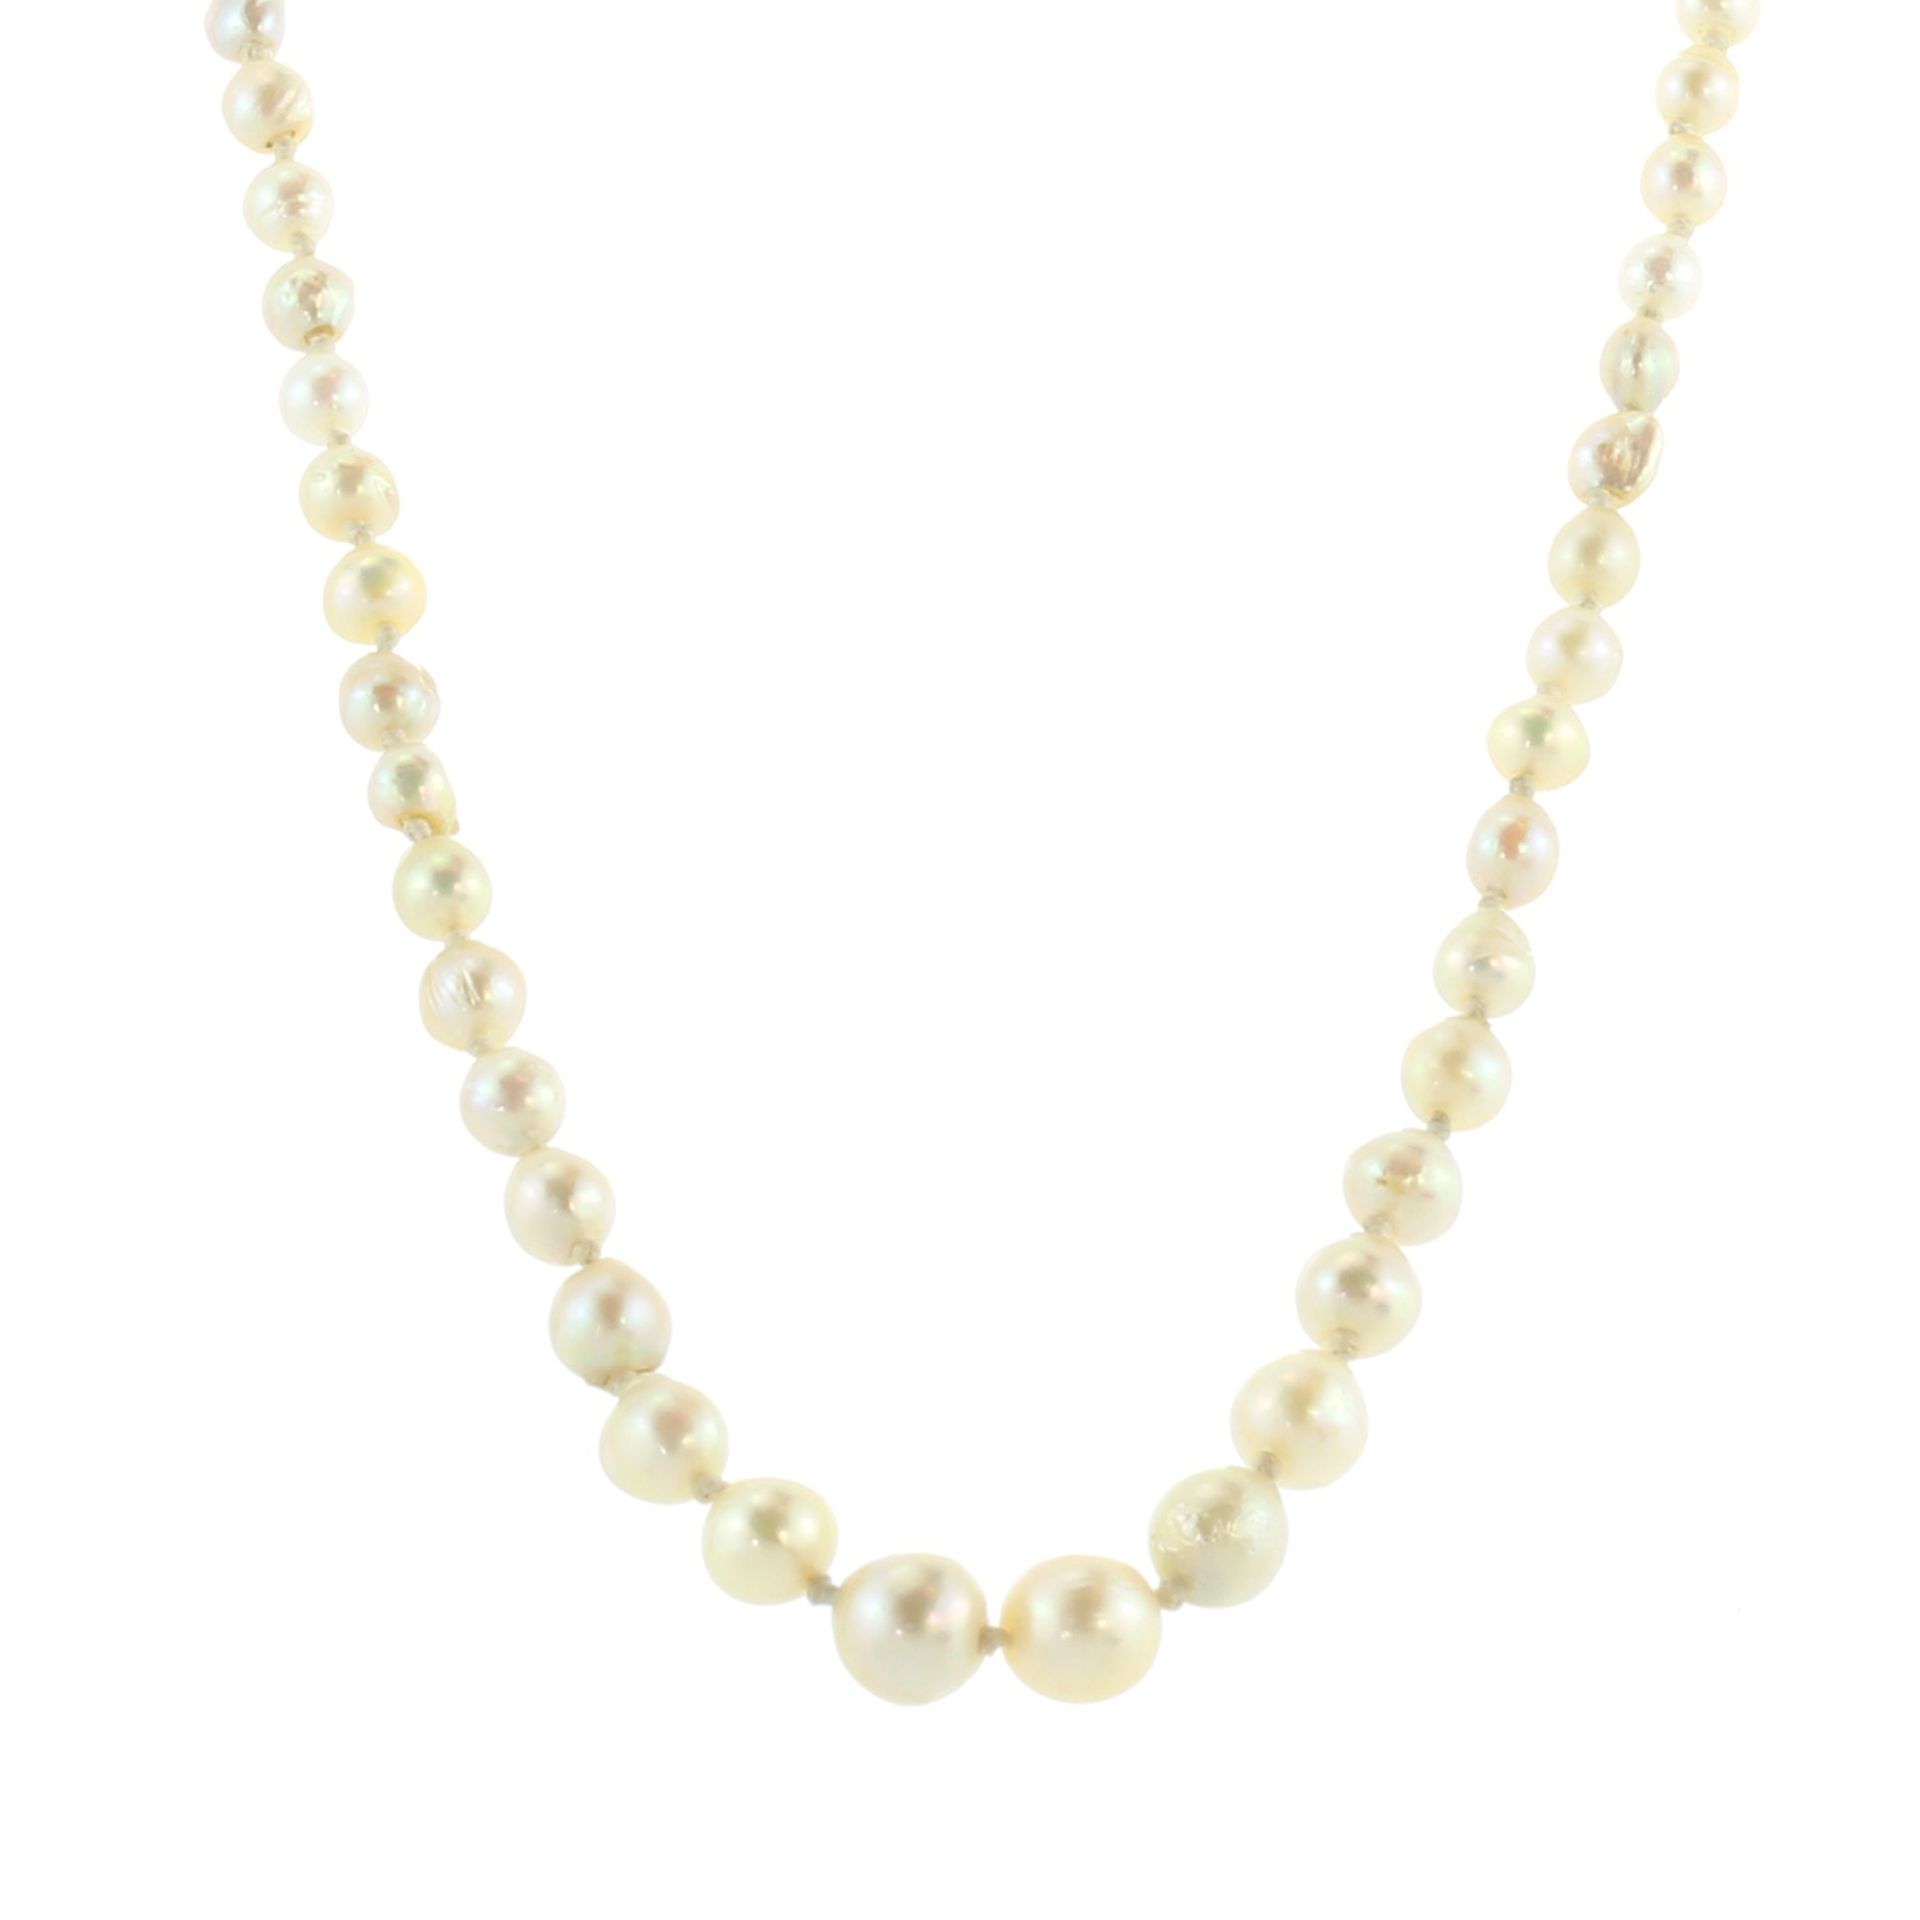 An antique pearl necklace comprising a single strand of ninety six graduated pearls with a